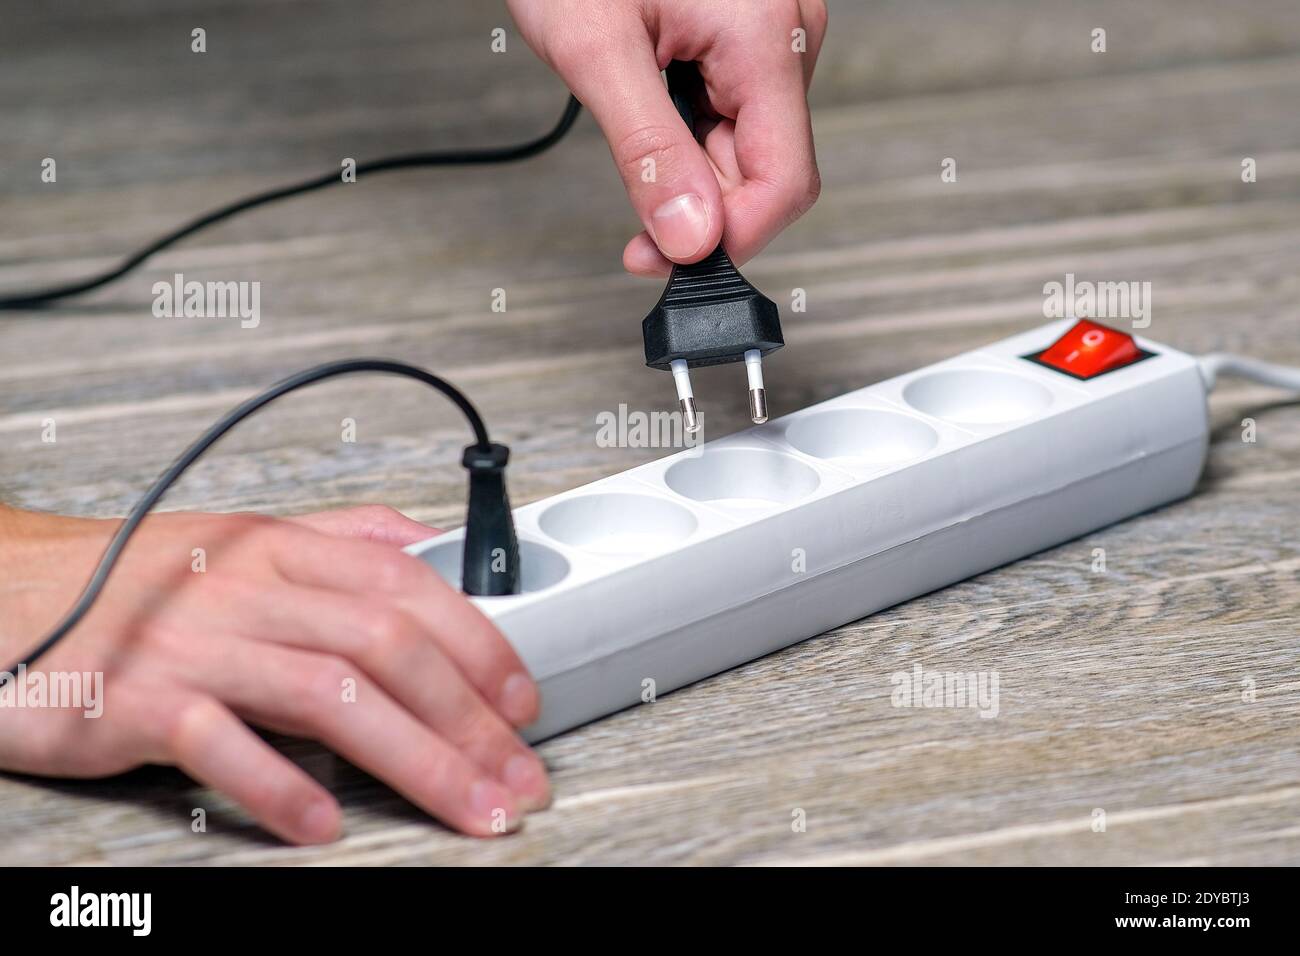 The hostess holds in her hand an electric extension cord with a fuse and connect the appliance to the outlet Stock Photo